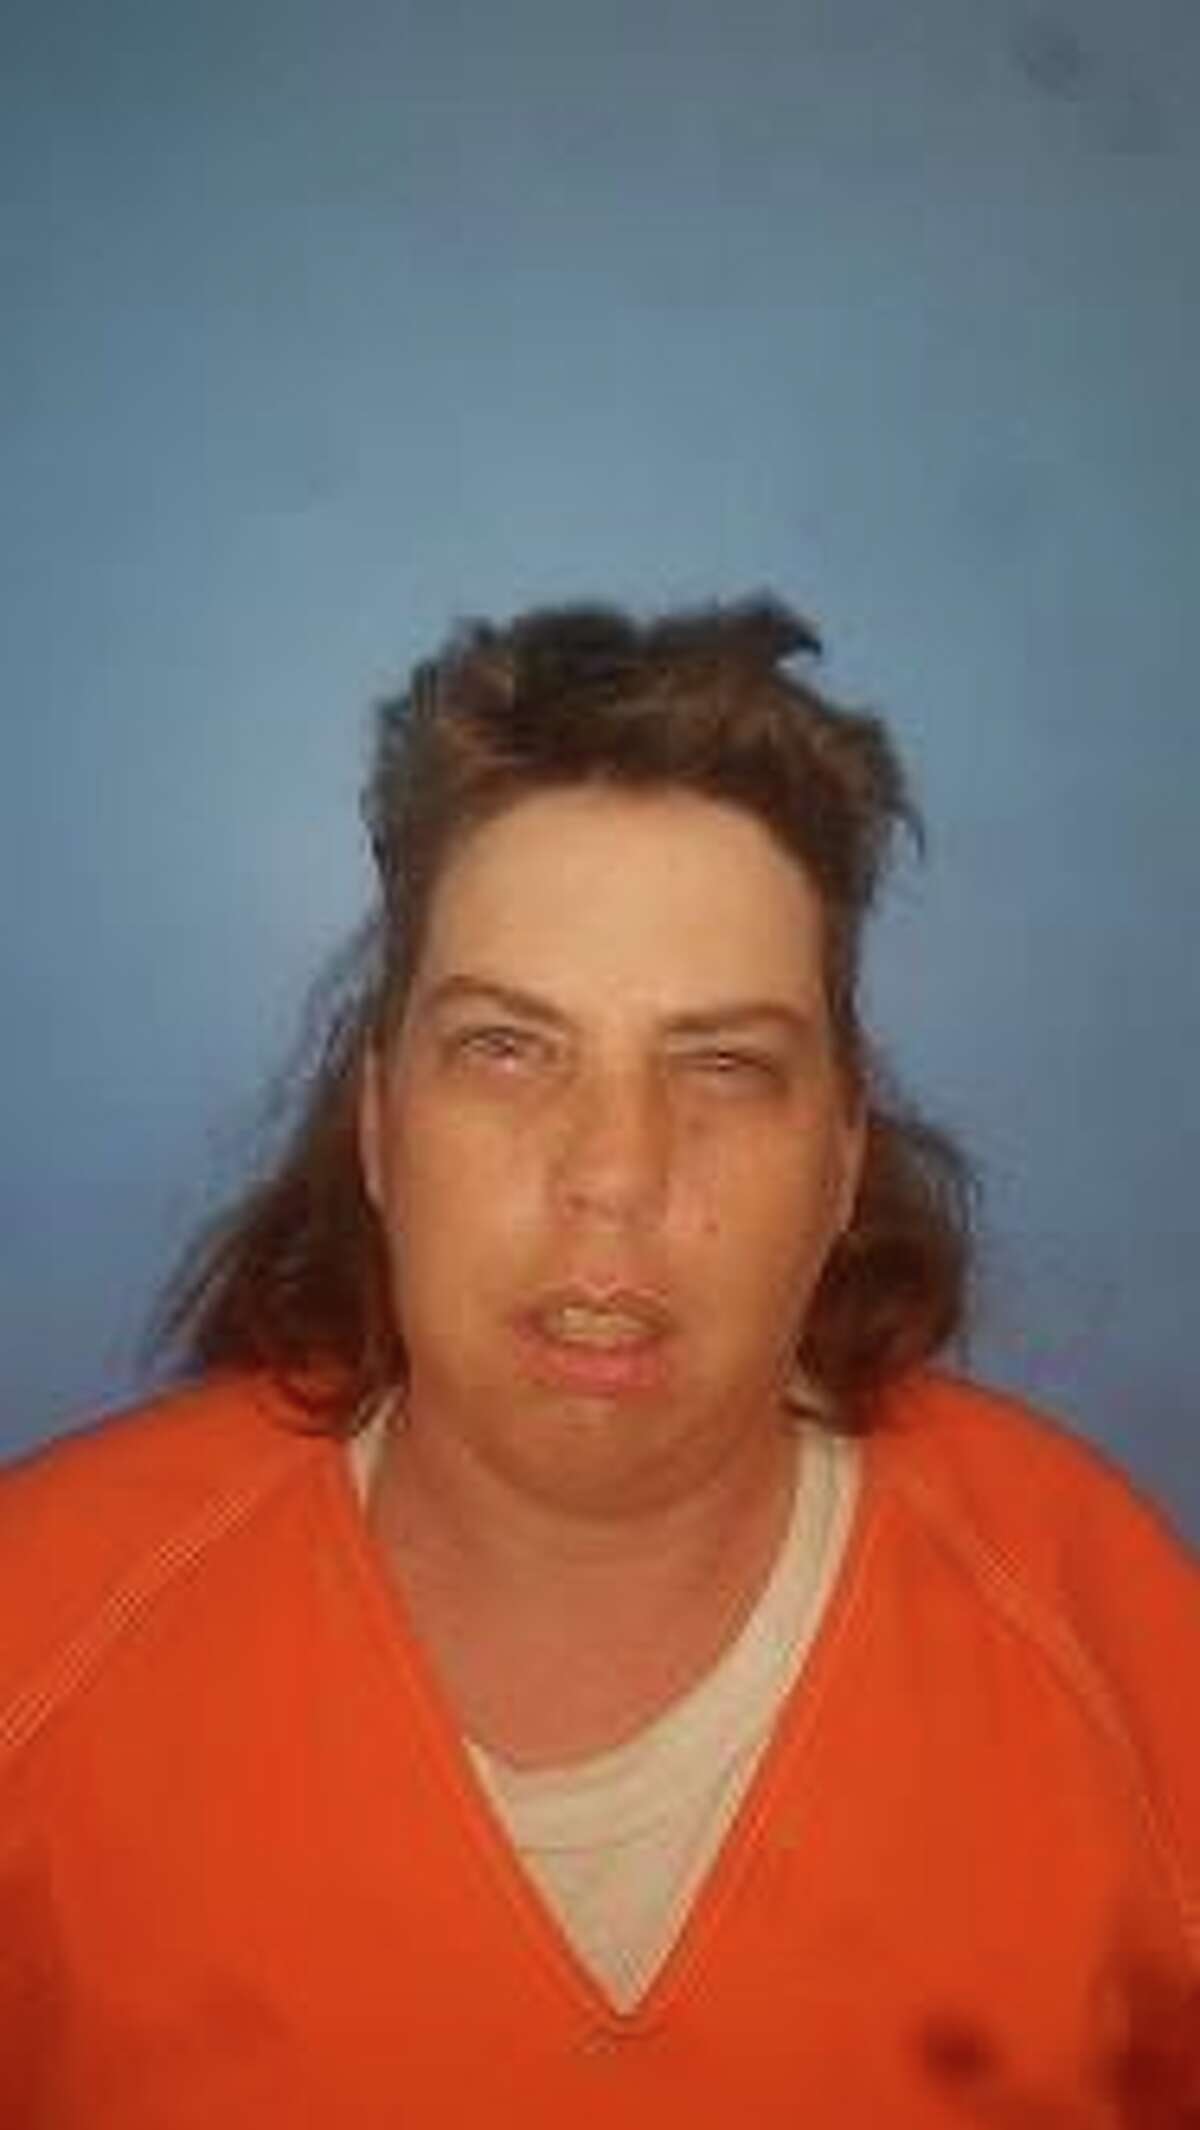 Kimberly D. Hofsteter, a 40-year-old woman from Hico, was arrested as part of a bust targeting drug traffickers in Hamilton, Hico and Clifton. Hofsteter has been charged with delivery of more than 1 gram but under 4 grams of oxycodone in a drug-free zone, a first-degree felony.